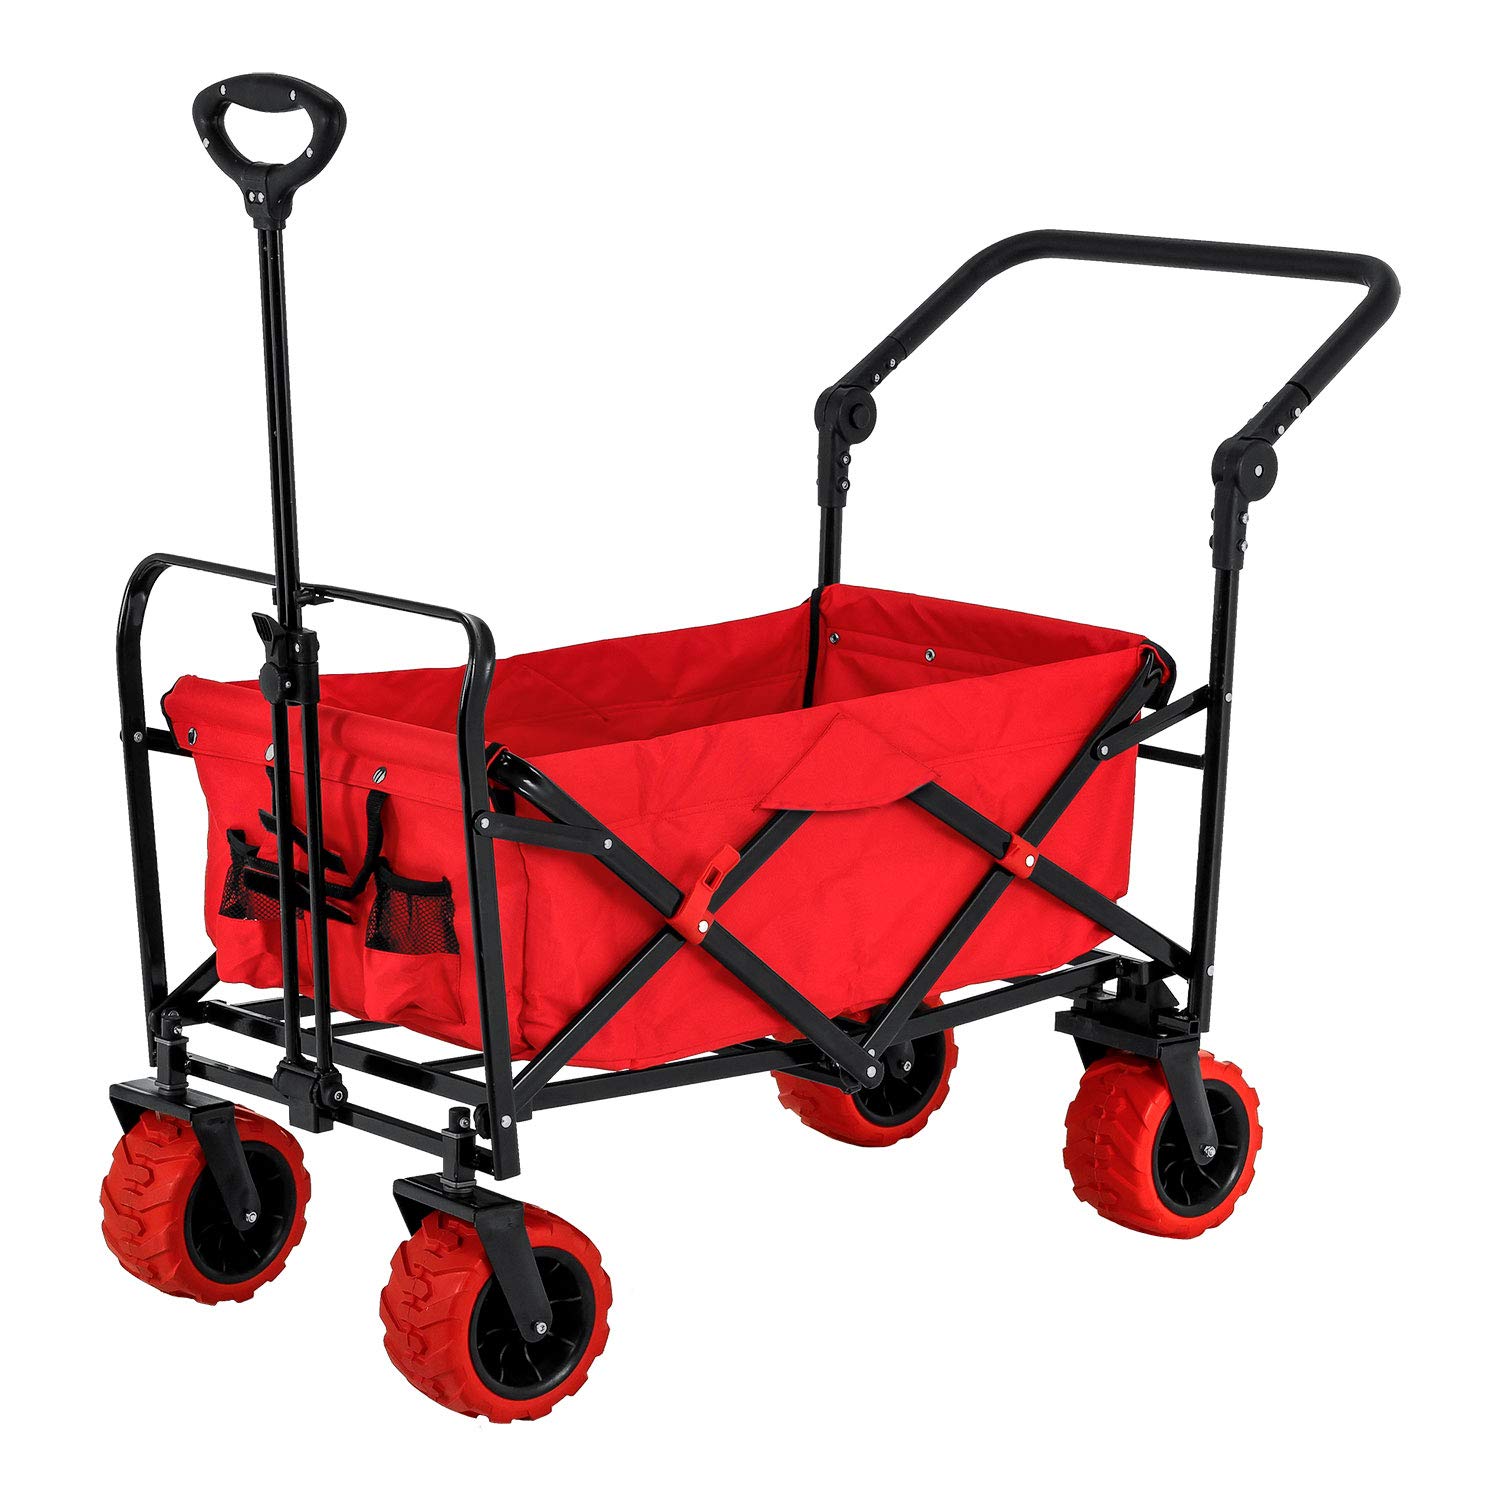 1200D Canvas All Terrain Collapsible Utility Wagon for Sand Sports Outdoor Picnic Garden Use Red with Pad REDCAMP Folding Beach Wagon Cart with Big Wheels 2.6 Wide 